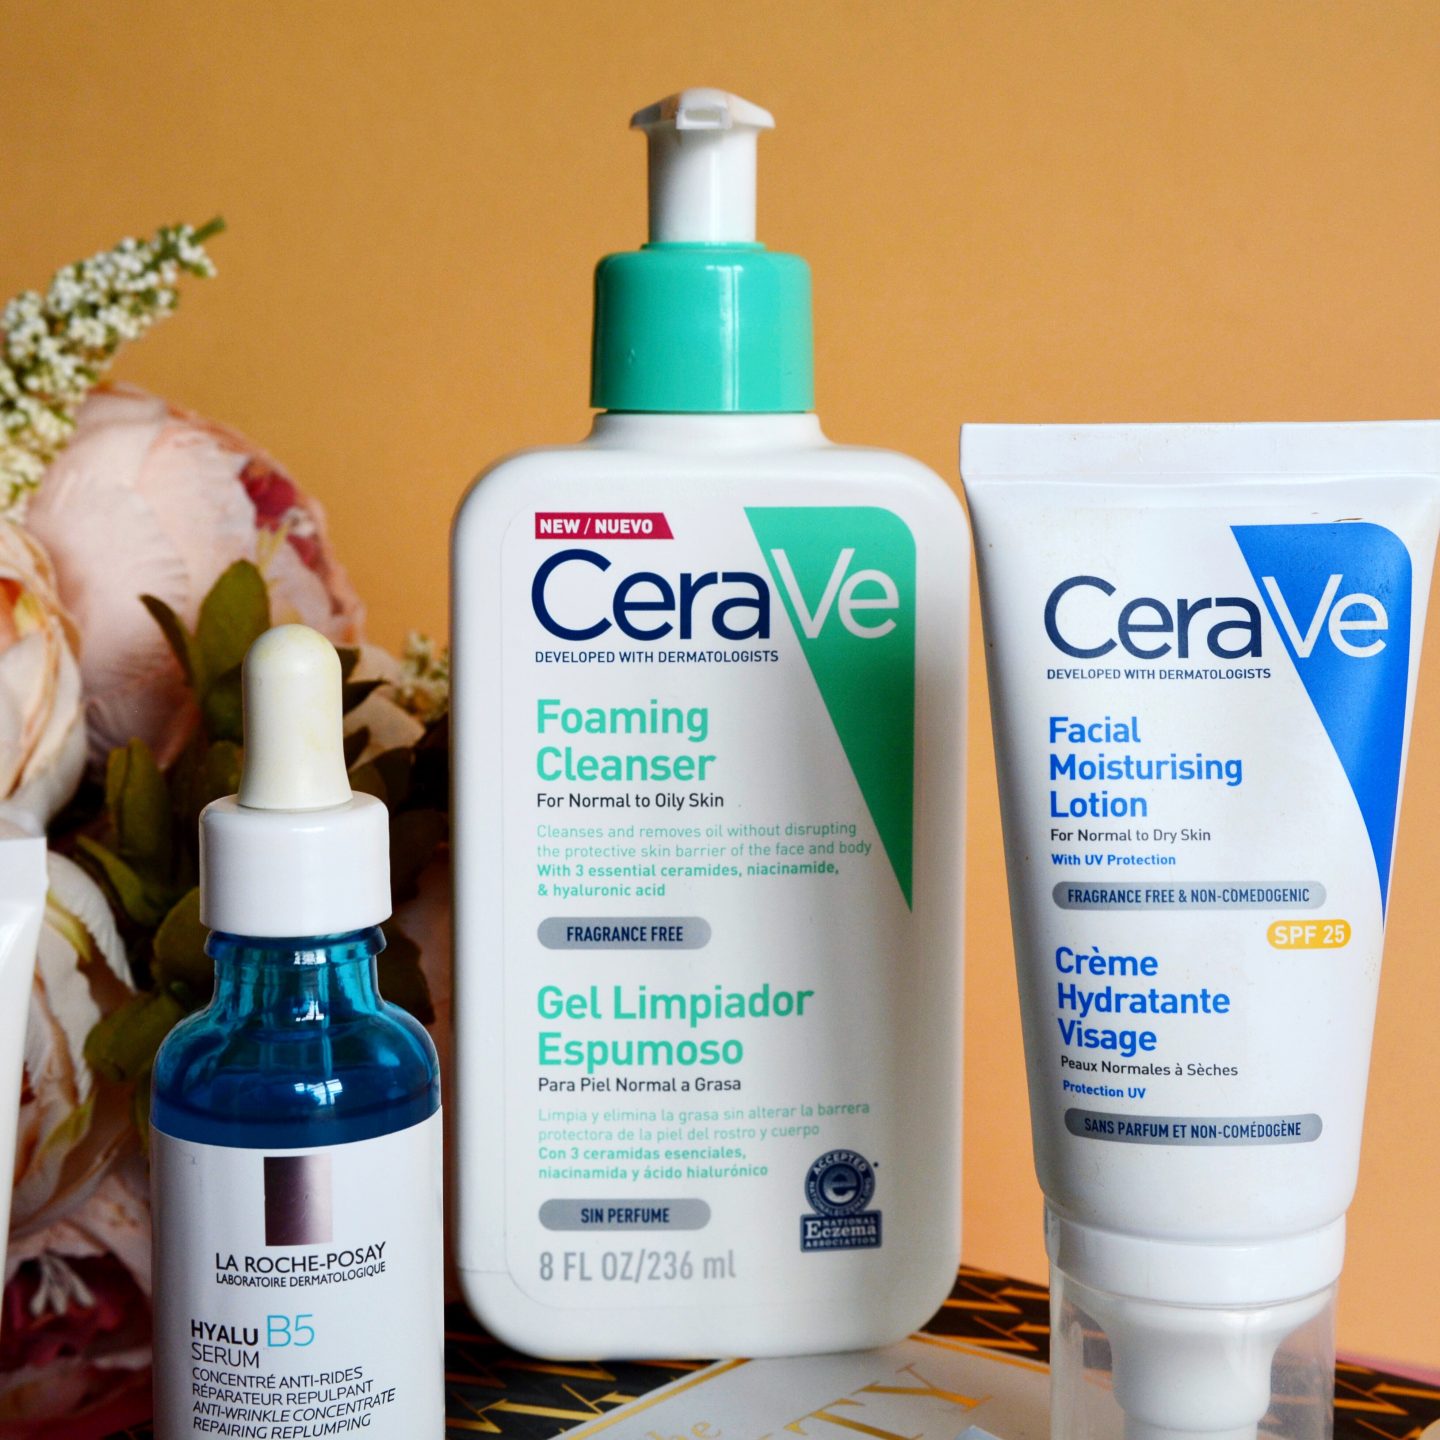 My current skincare routine: CeraVe comes to the UK! (rosacea, sensitive skin)